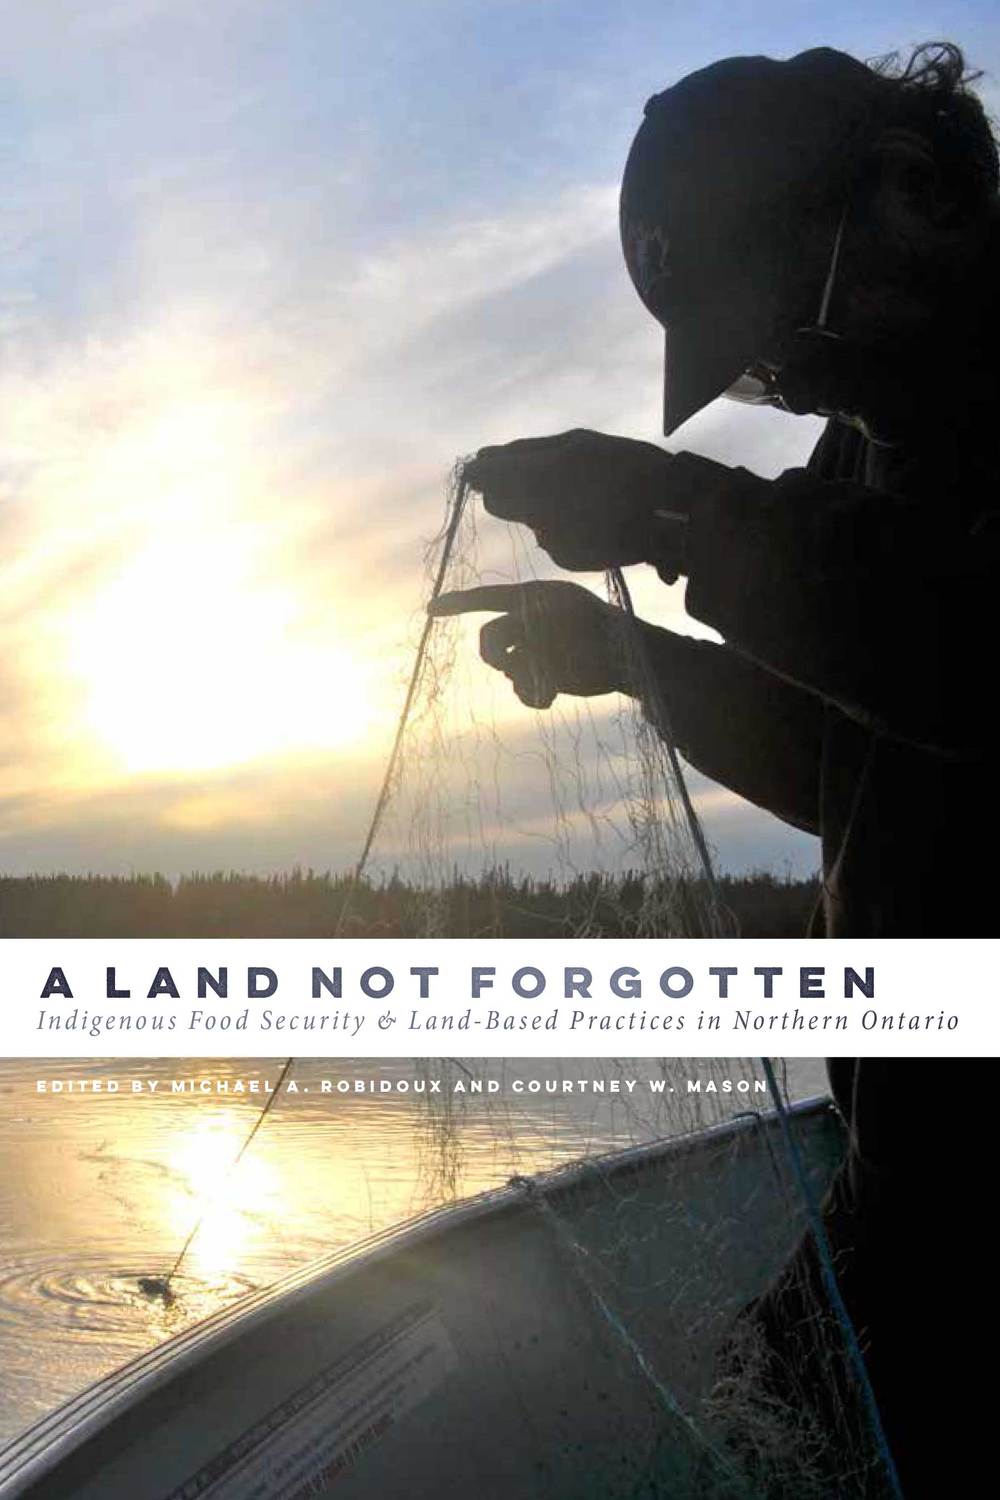 A Land Not Forgotten: Indigenous Food Security and Land-Based Practices in Northern Ontario by Michael A. Robidoux & Courtney W. Mason 